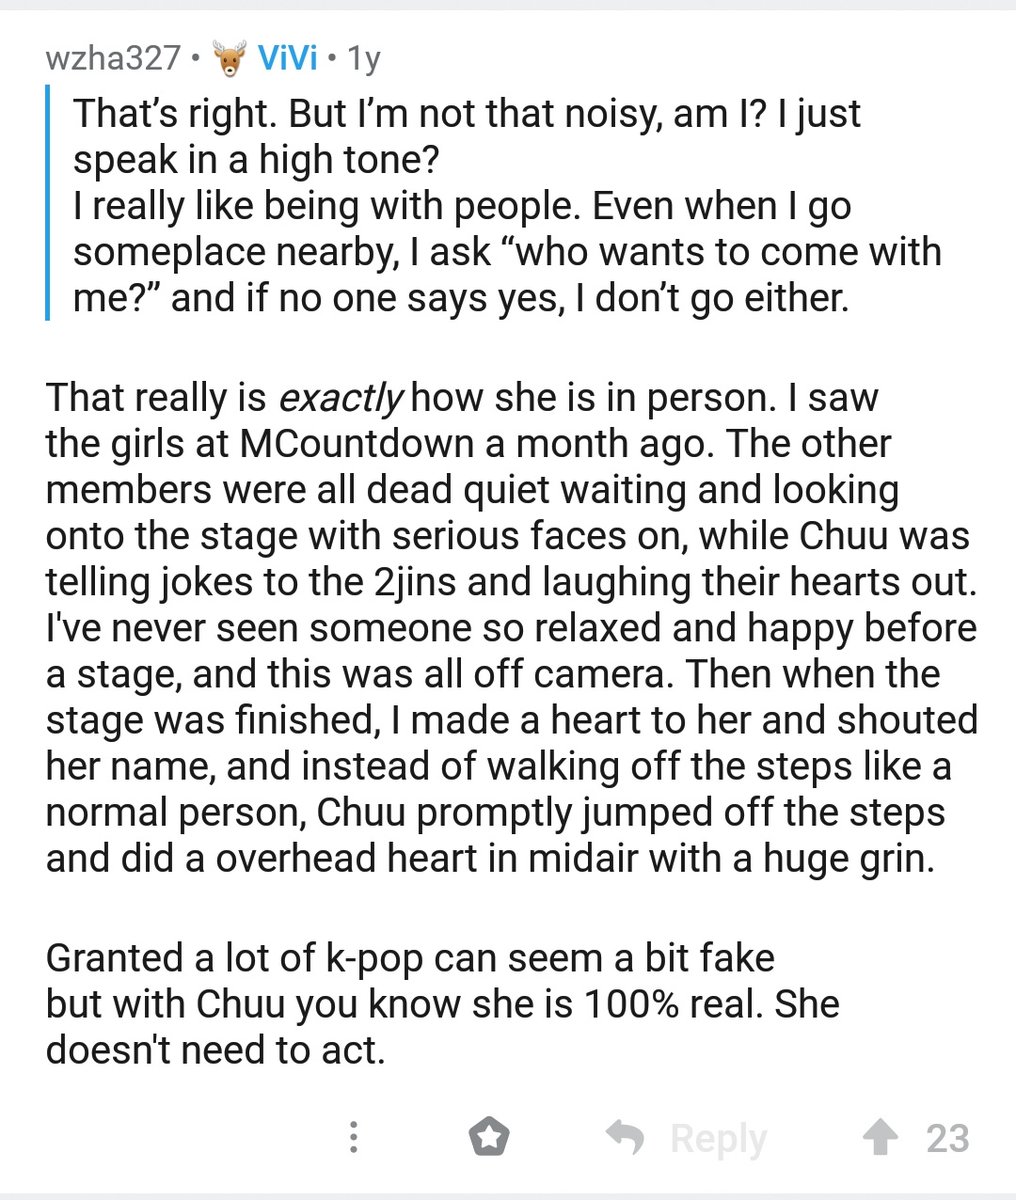 This user on reddit about Chuu. Just wow.